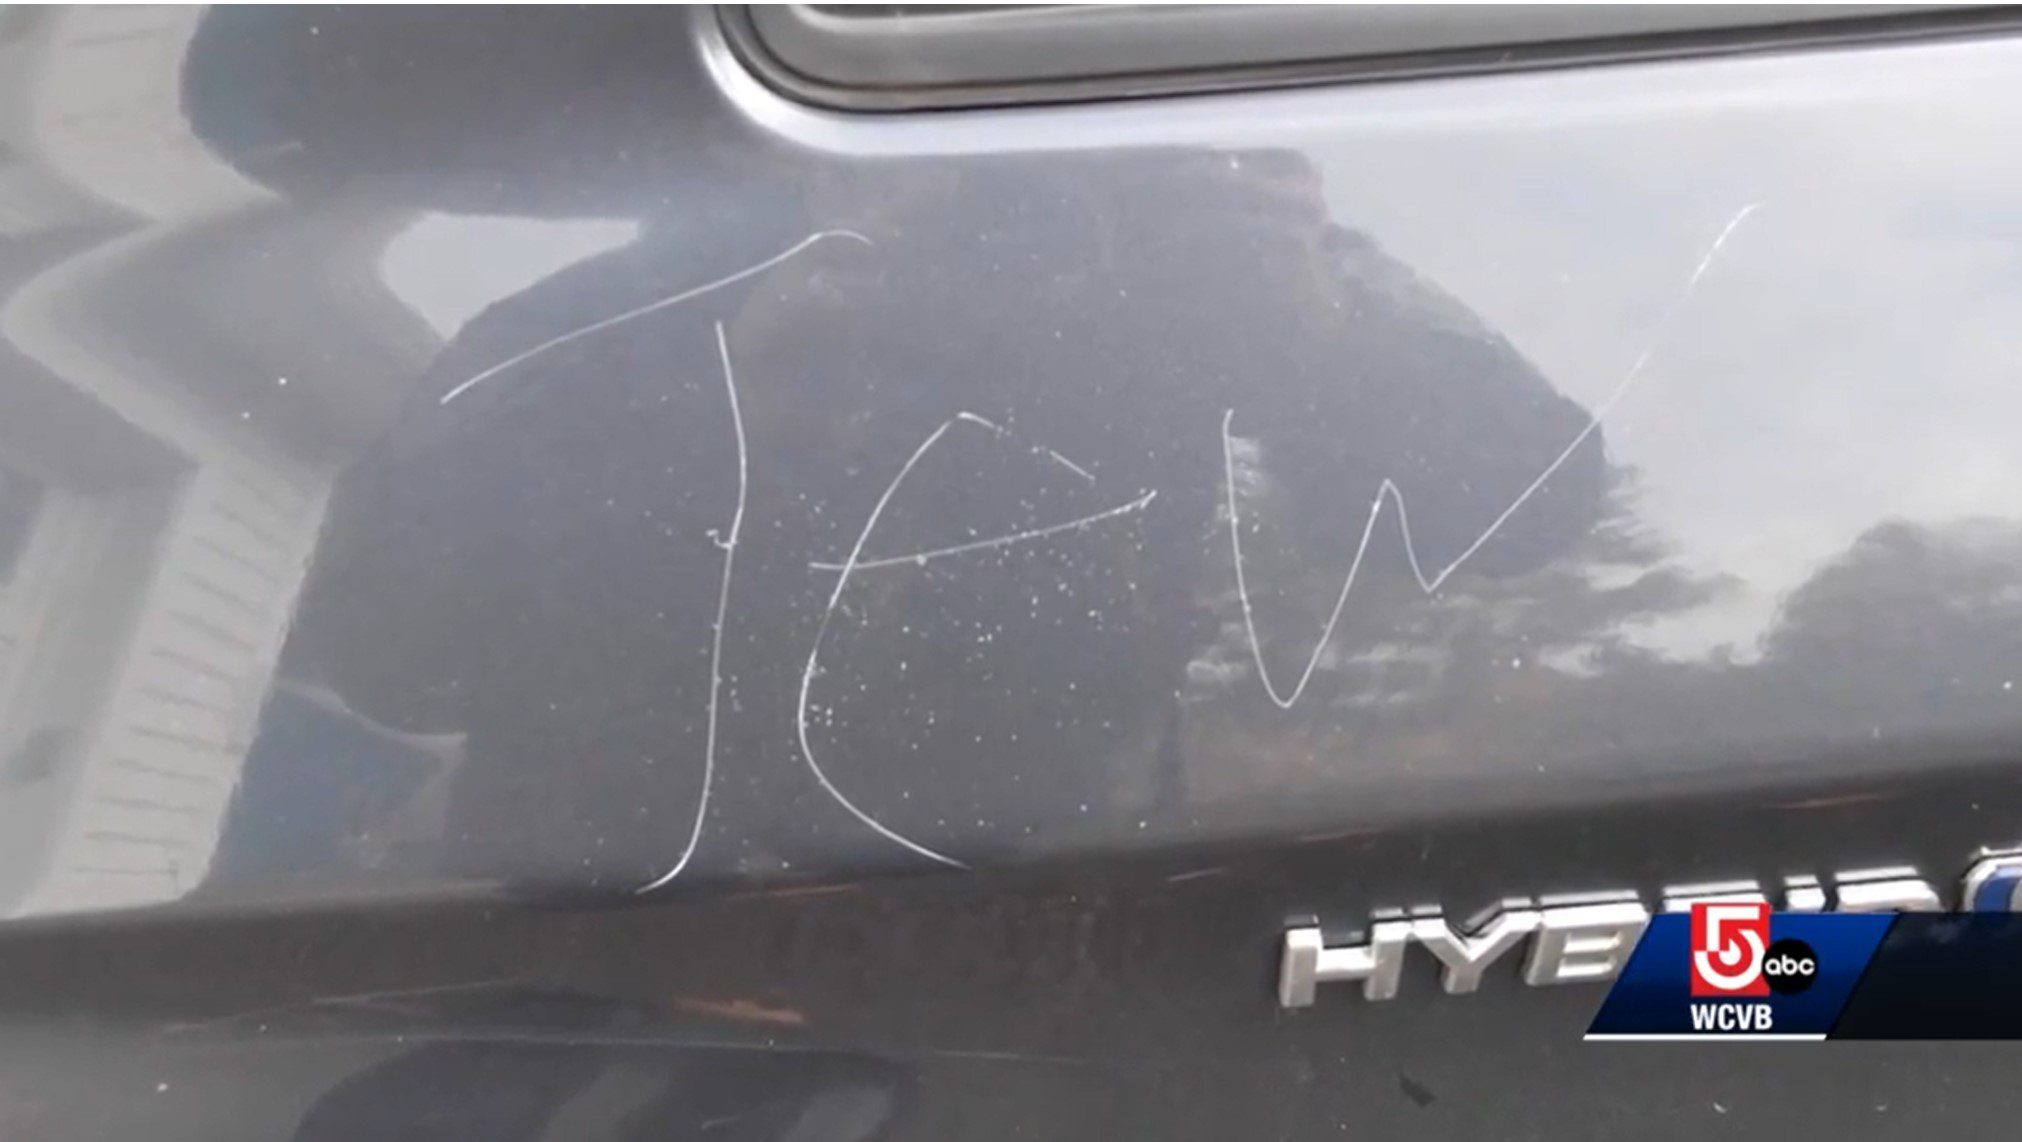 Antisemitic slur found scrawled on car with slashed tires in Stow, Massachusetts (Screenshot)